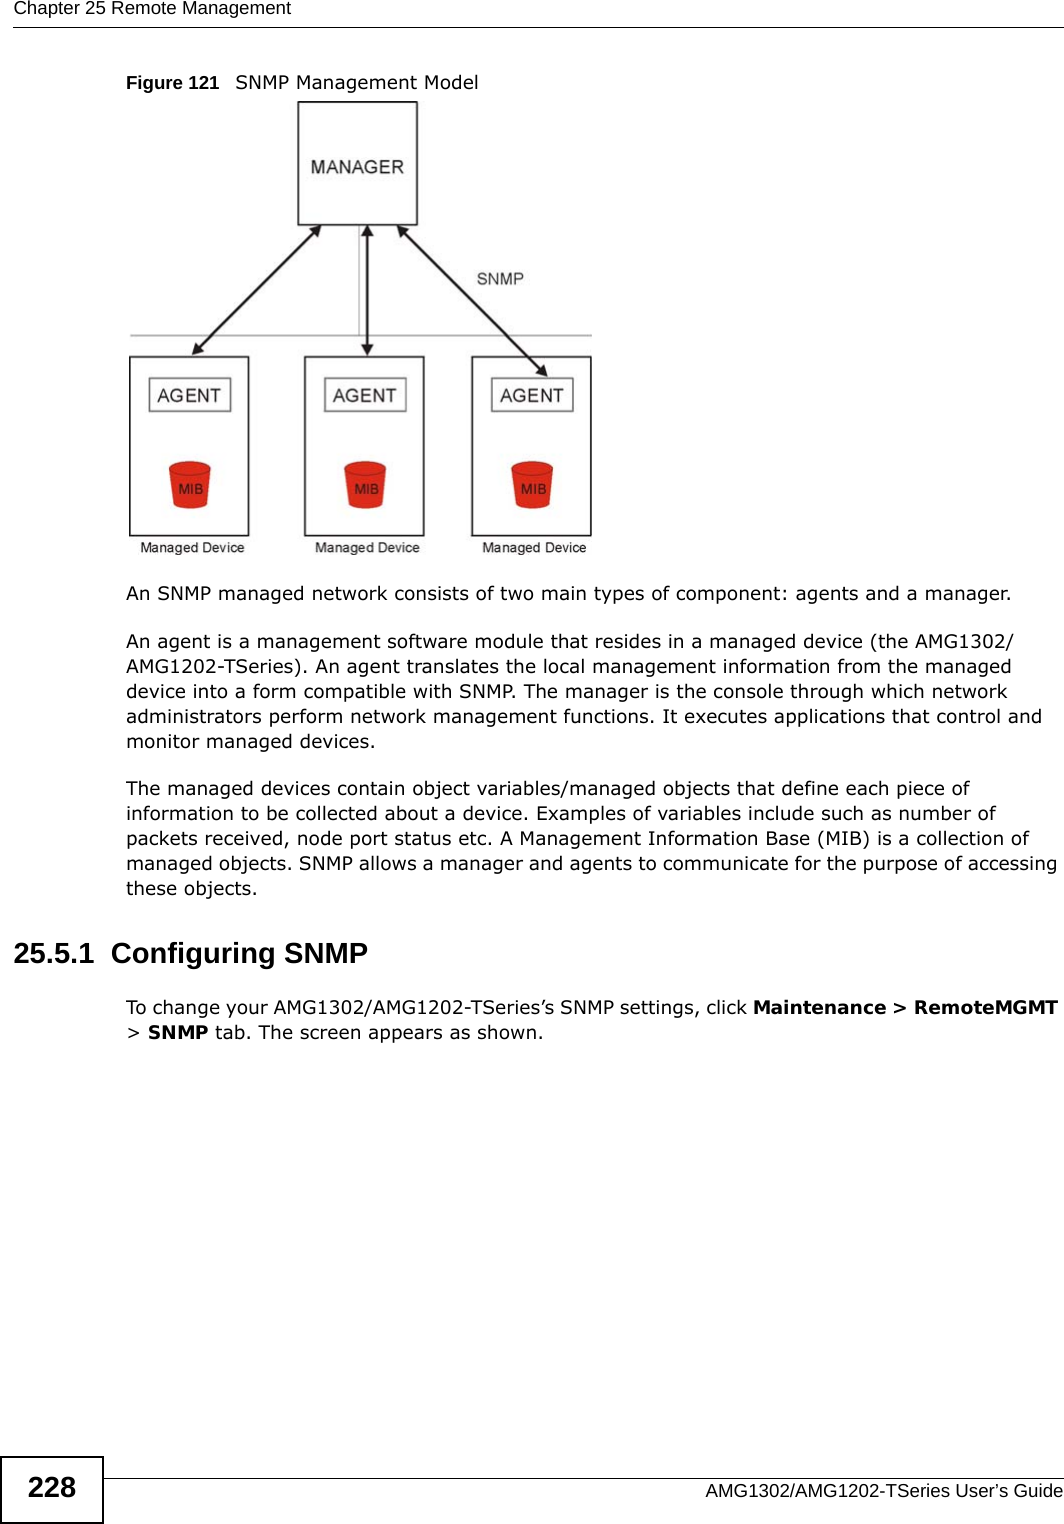 Chapter 25 Remote ManagementAMG1302/AMG1202-TSeries User’s Guide228Figure 121   SNMP Management ModelAn SNMP managed network consists of two main types of component: agents and a manager. An agent is a management software module that resides in a managed device (the AMG1302/AMG1202-TSeries). An agent translates the local management information from the managed device into a form compatible with SNMP. The manager is the console through which network administrators perform network management functions. It executes applications that control and monitor managed devices. The managed devices contain object variables/managed objects that define each piece of information to be collected about a device. Examples of variables include such as number of packets received, node port status etc. A Management Information Base (MIB) is a collection of managed objects. SNMP allows a manager and agents to communicate for the purpose of accessing these objects.25.5.1  Configuring SNMP To change your AMG1302/AMG1202-TSeries’s SNMP settings, click Maintenance &gt; RemoteMGMT &gt; SNMP tab. The screen appears as shown.